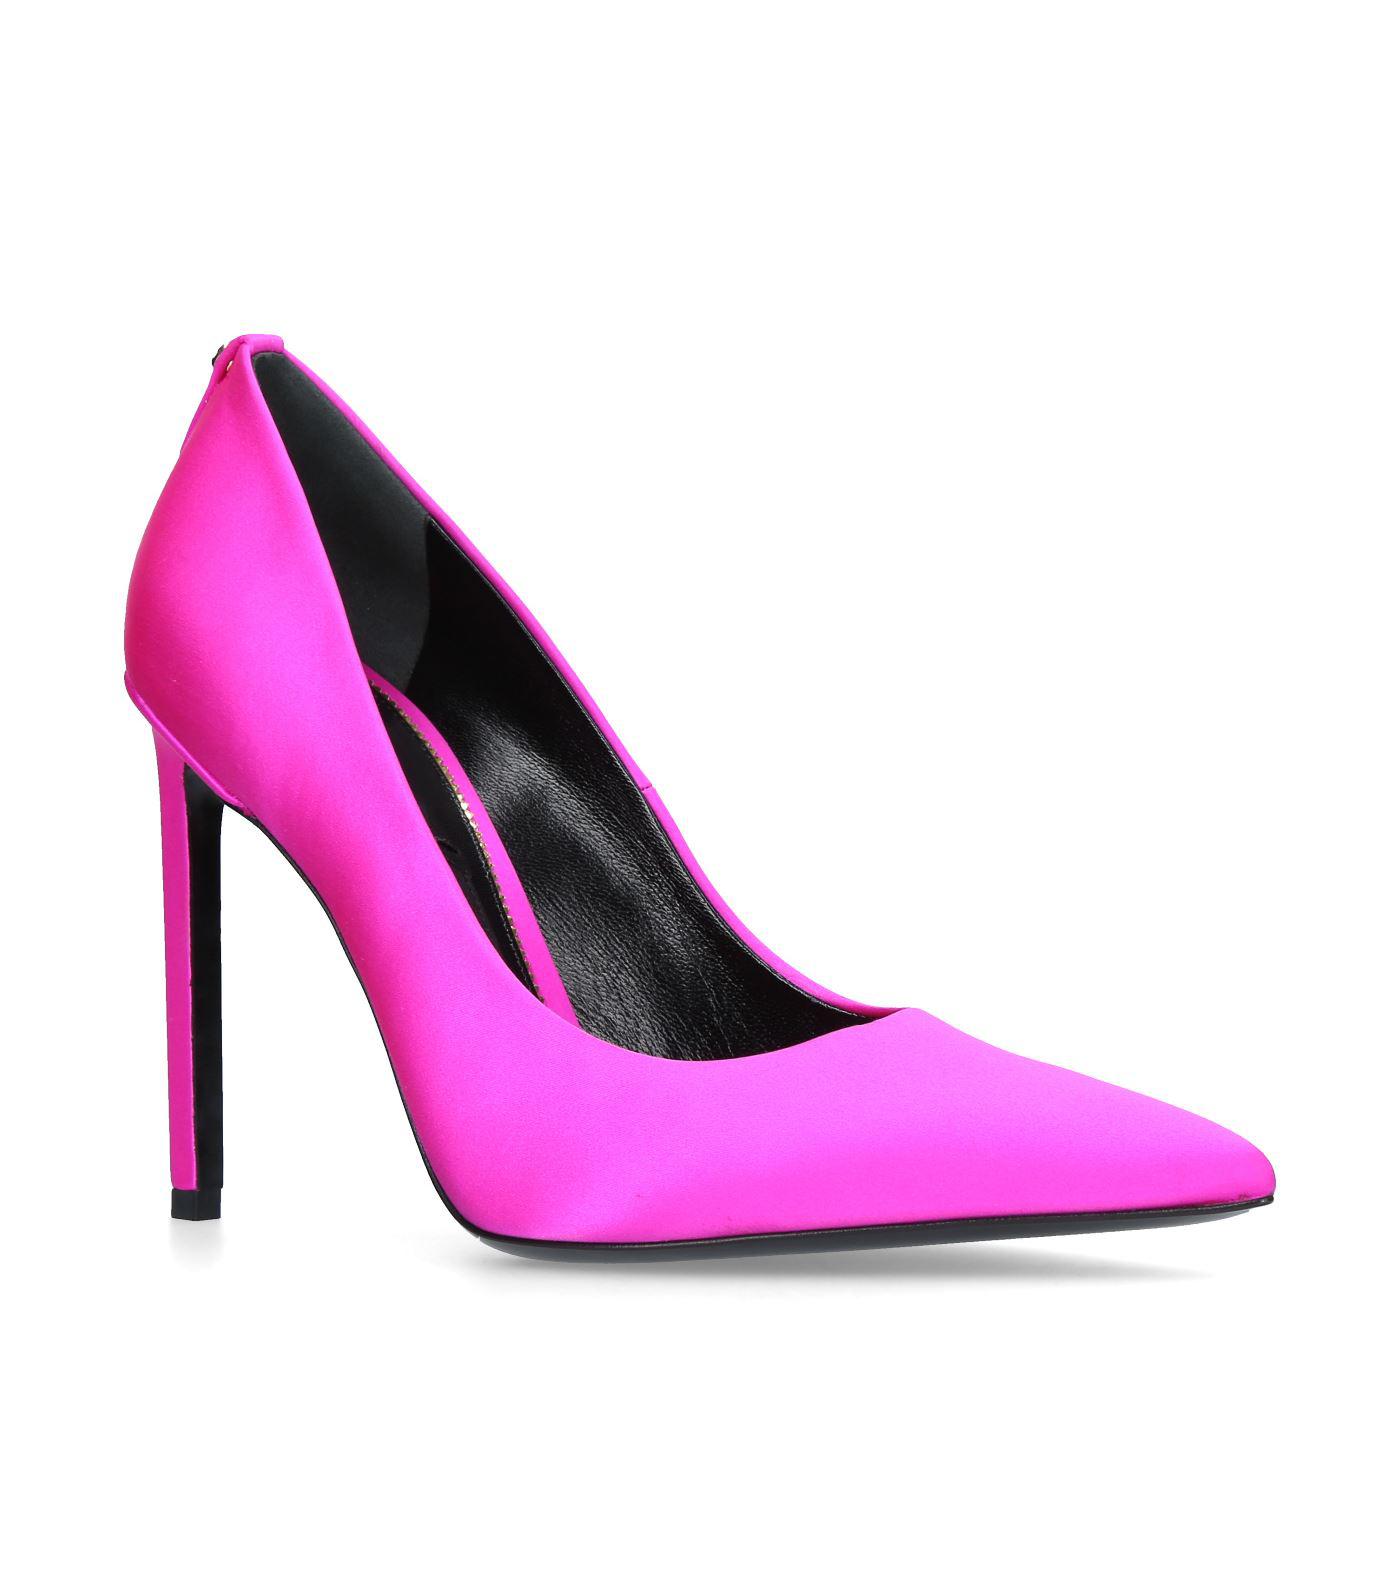 Tom Ford Satin Pumps in Pink | Lyst